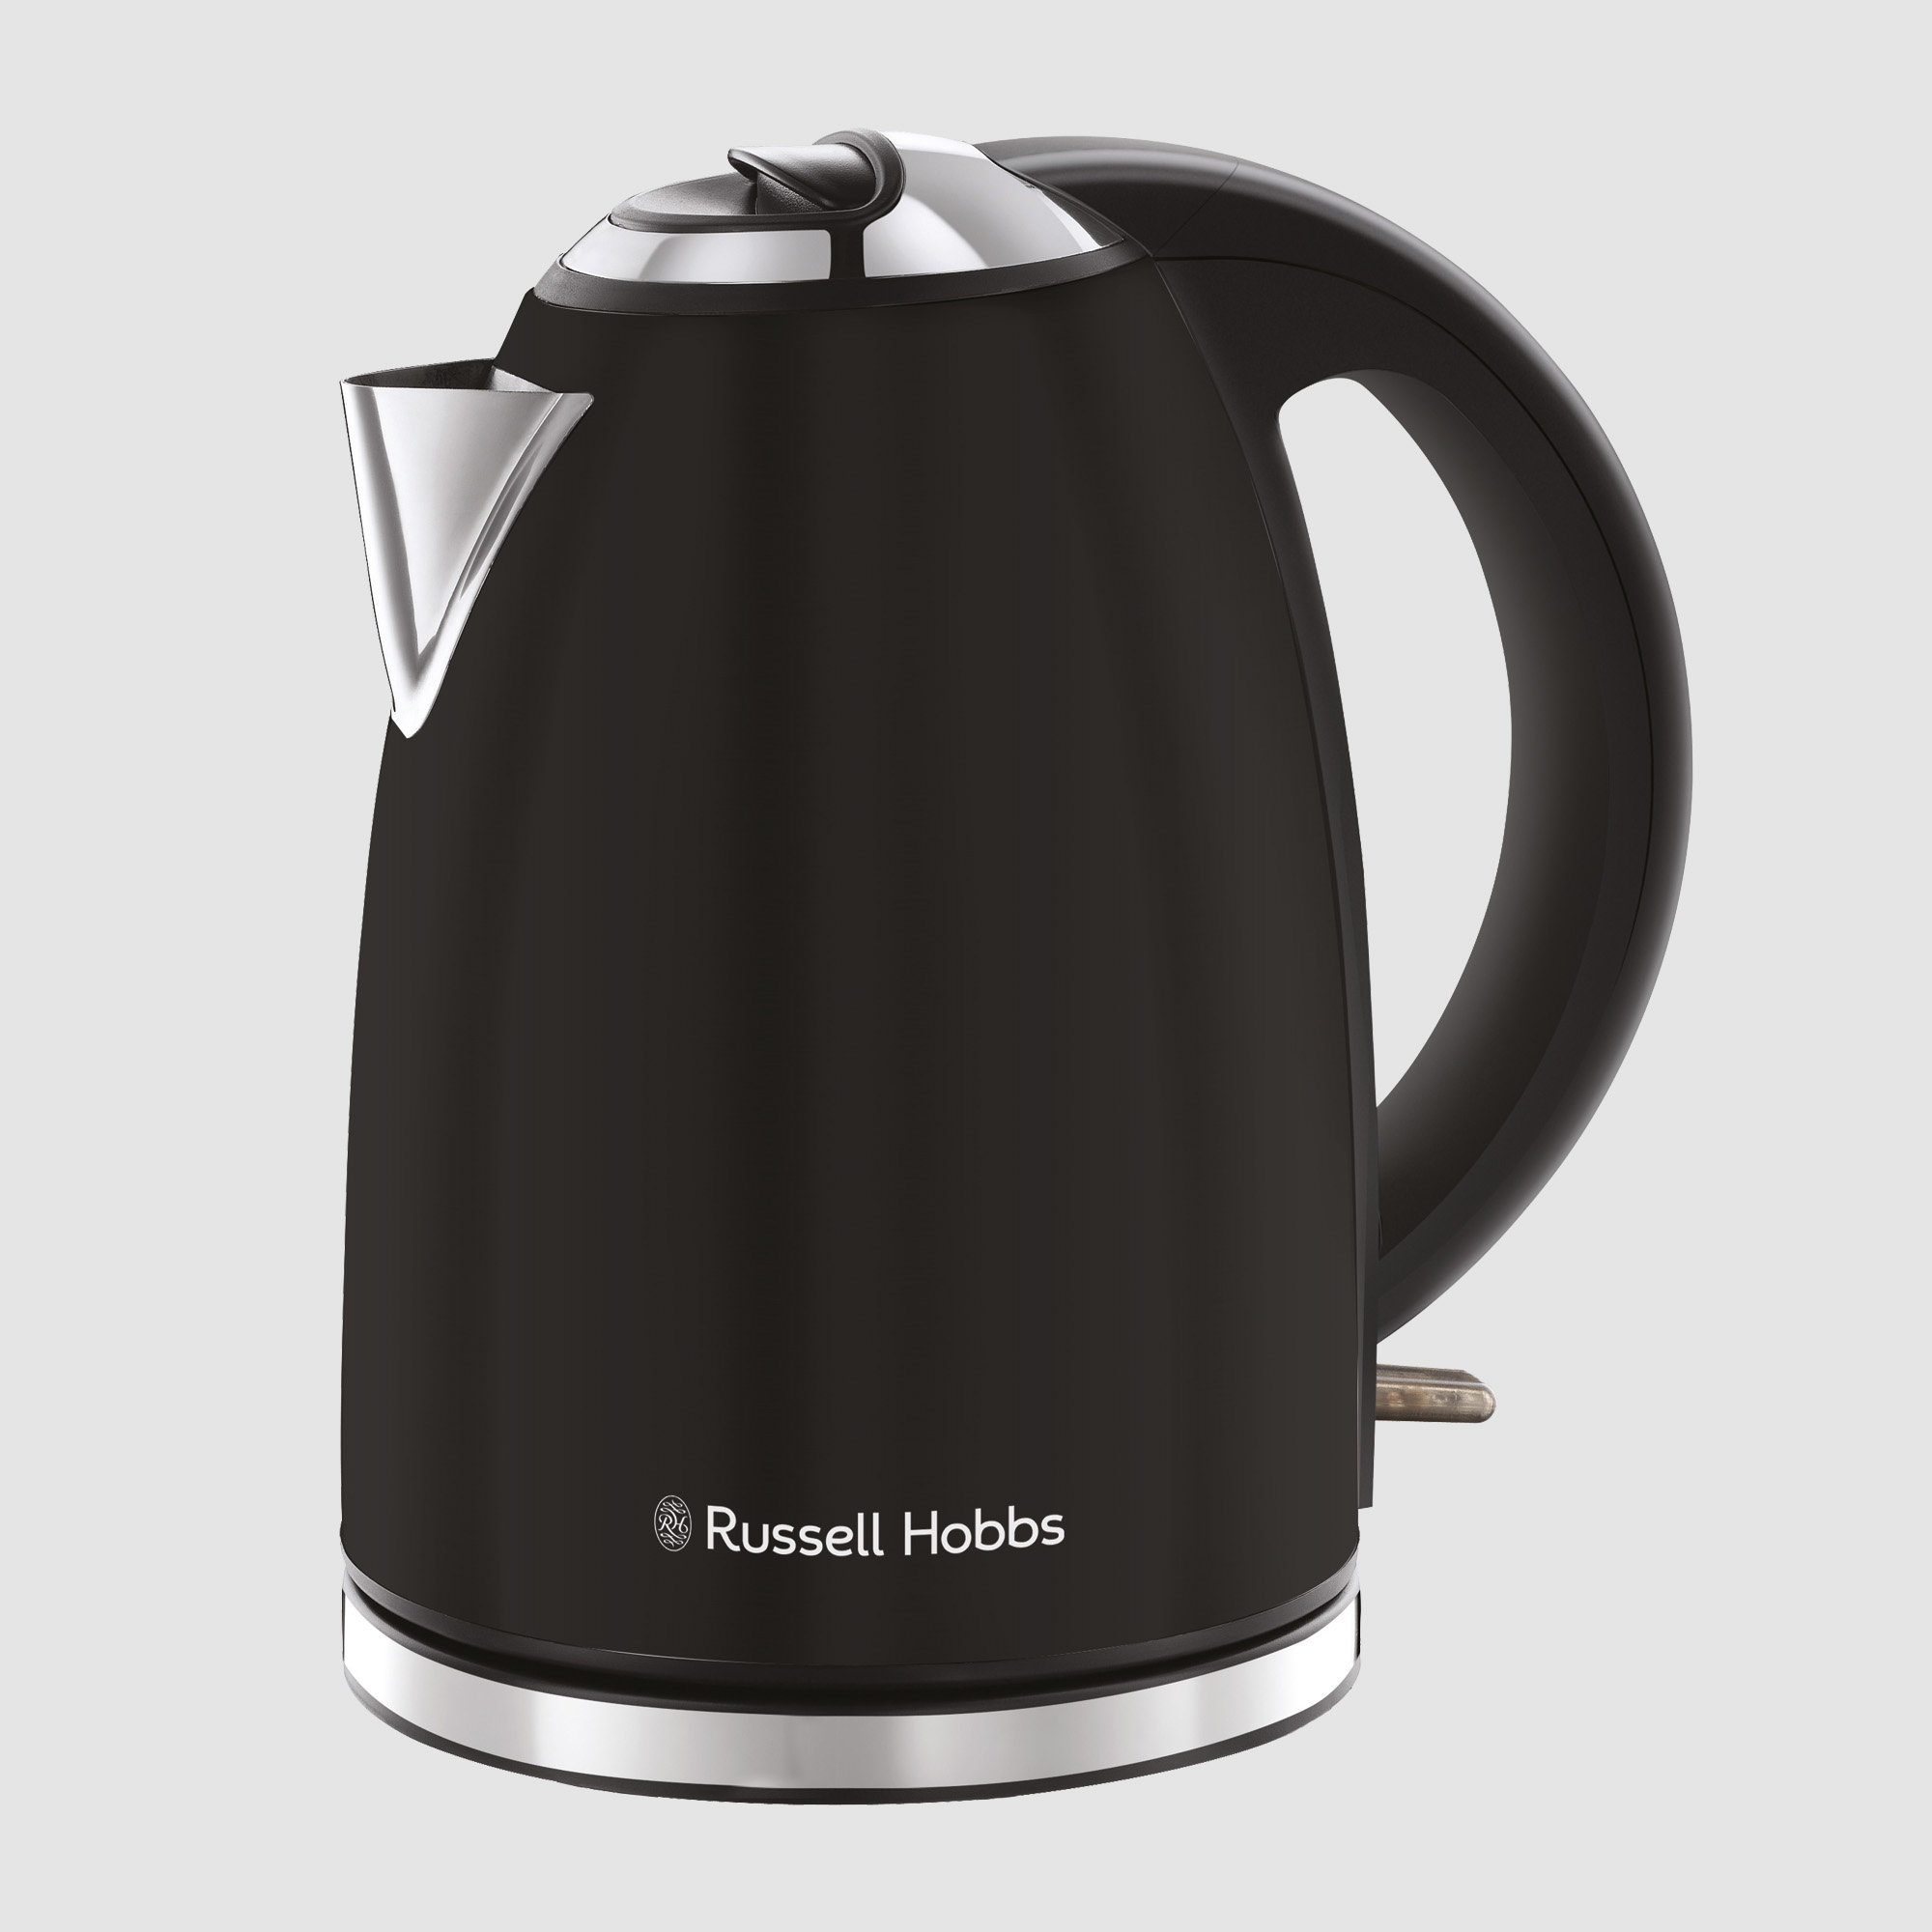 Smart Home Appliances Kettle Baby Appliances Whistling Kettle Russell Hobbs  Kettle 1.8L Stainless Smart Water Kettle - China Smart Home Appliances  Kettle and Baby Appliances Whistling Kettle price